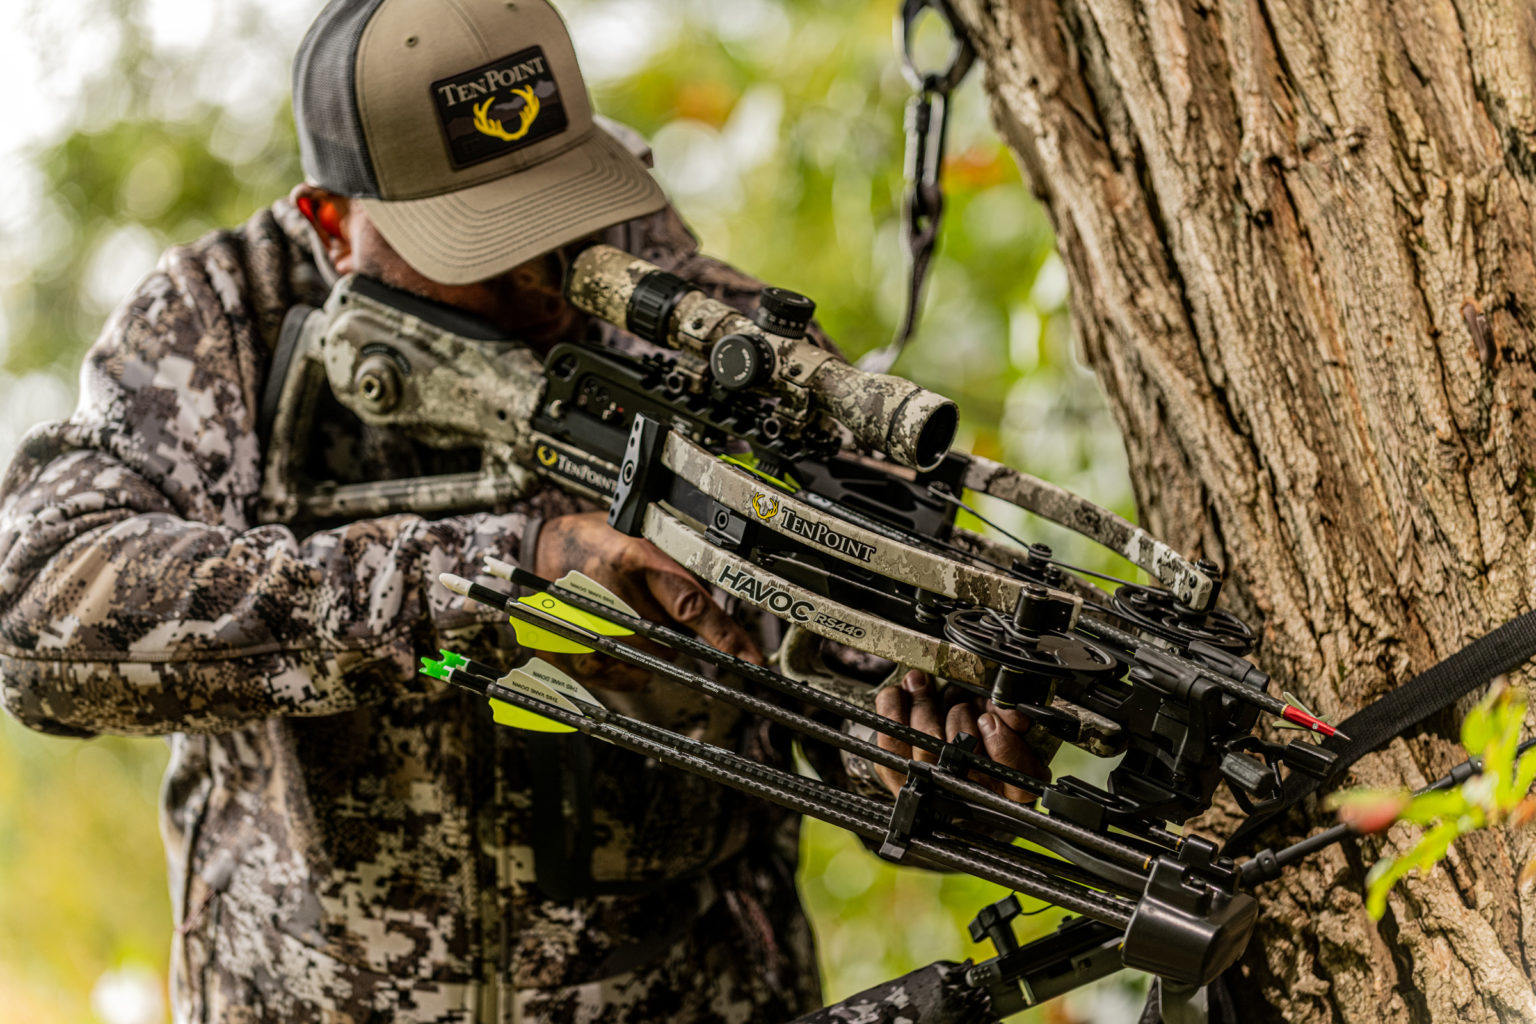 The Best Hunting Crossbows of 2021